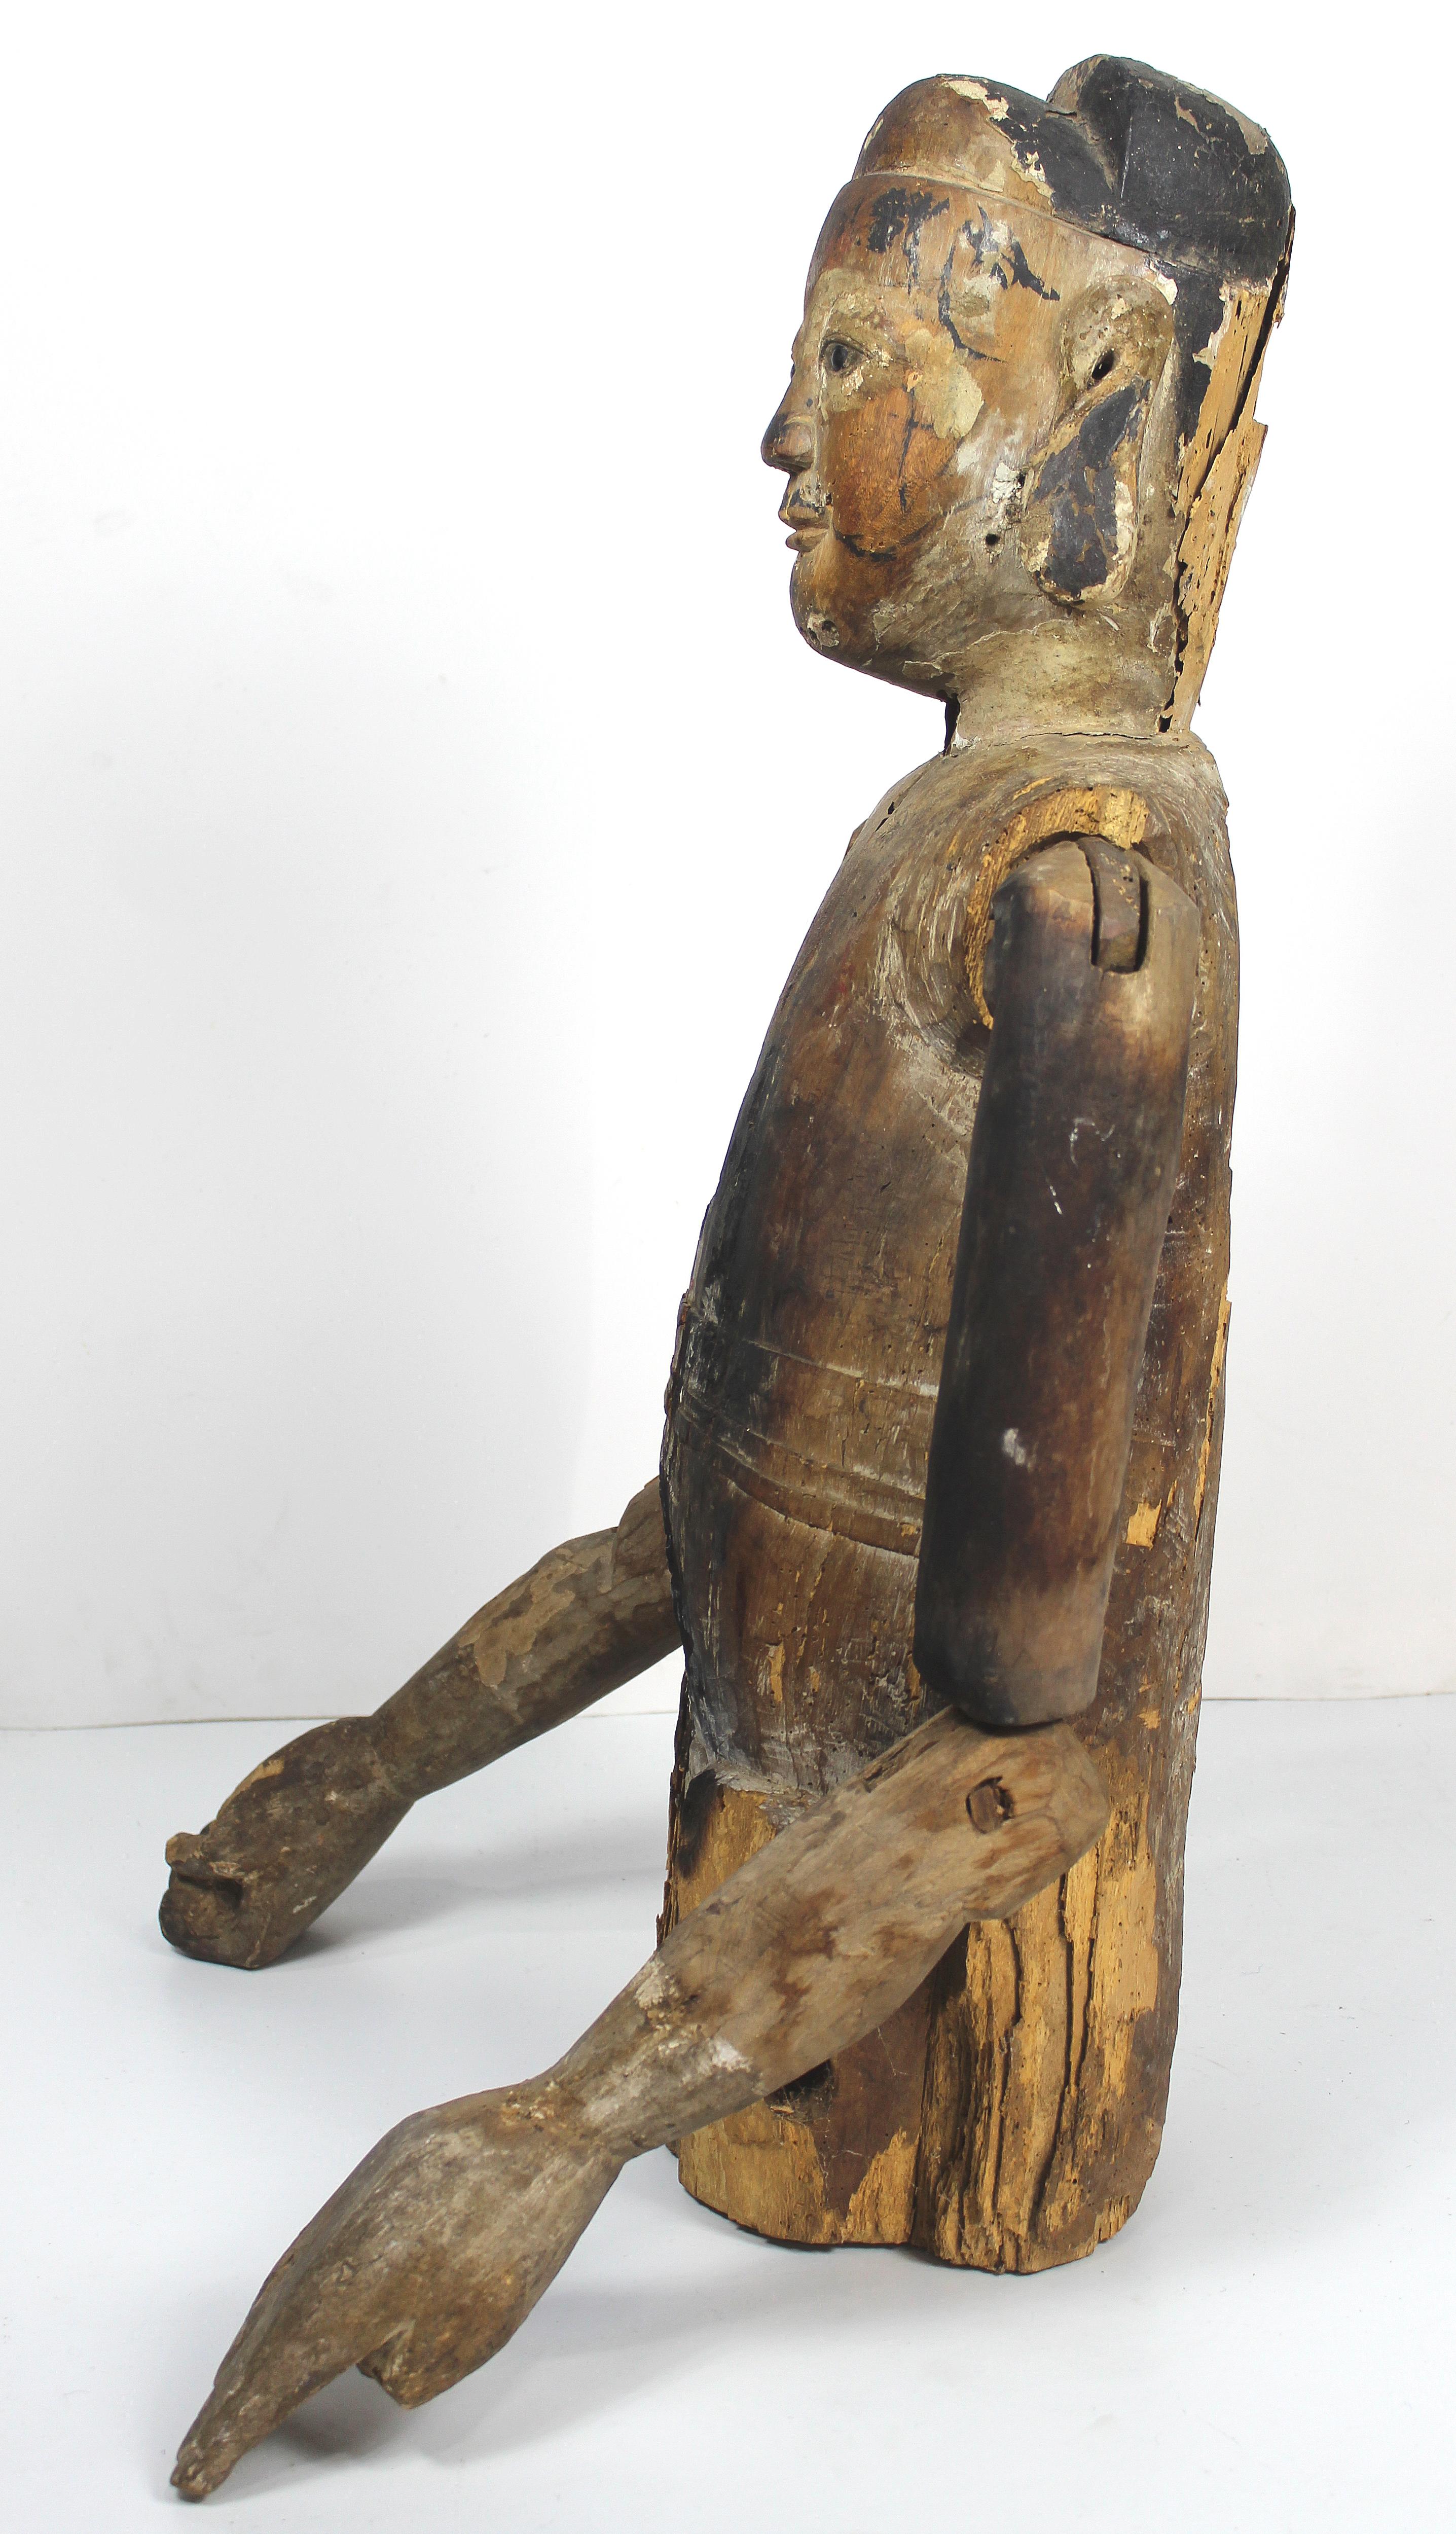 Hand-Carved 19th Century Antique Carved Wooden Figure Sculpture with Articulated Joints